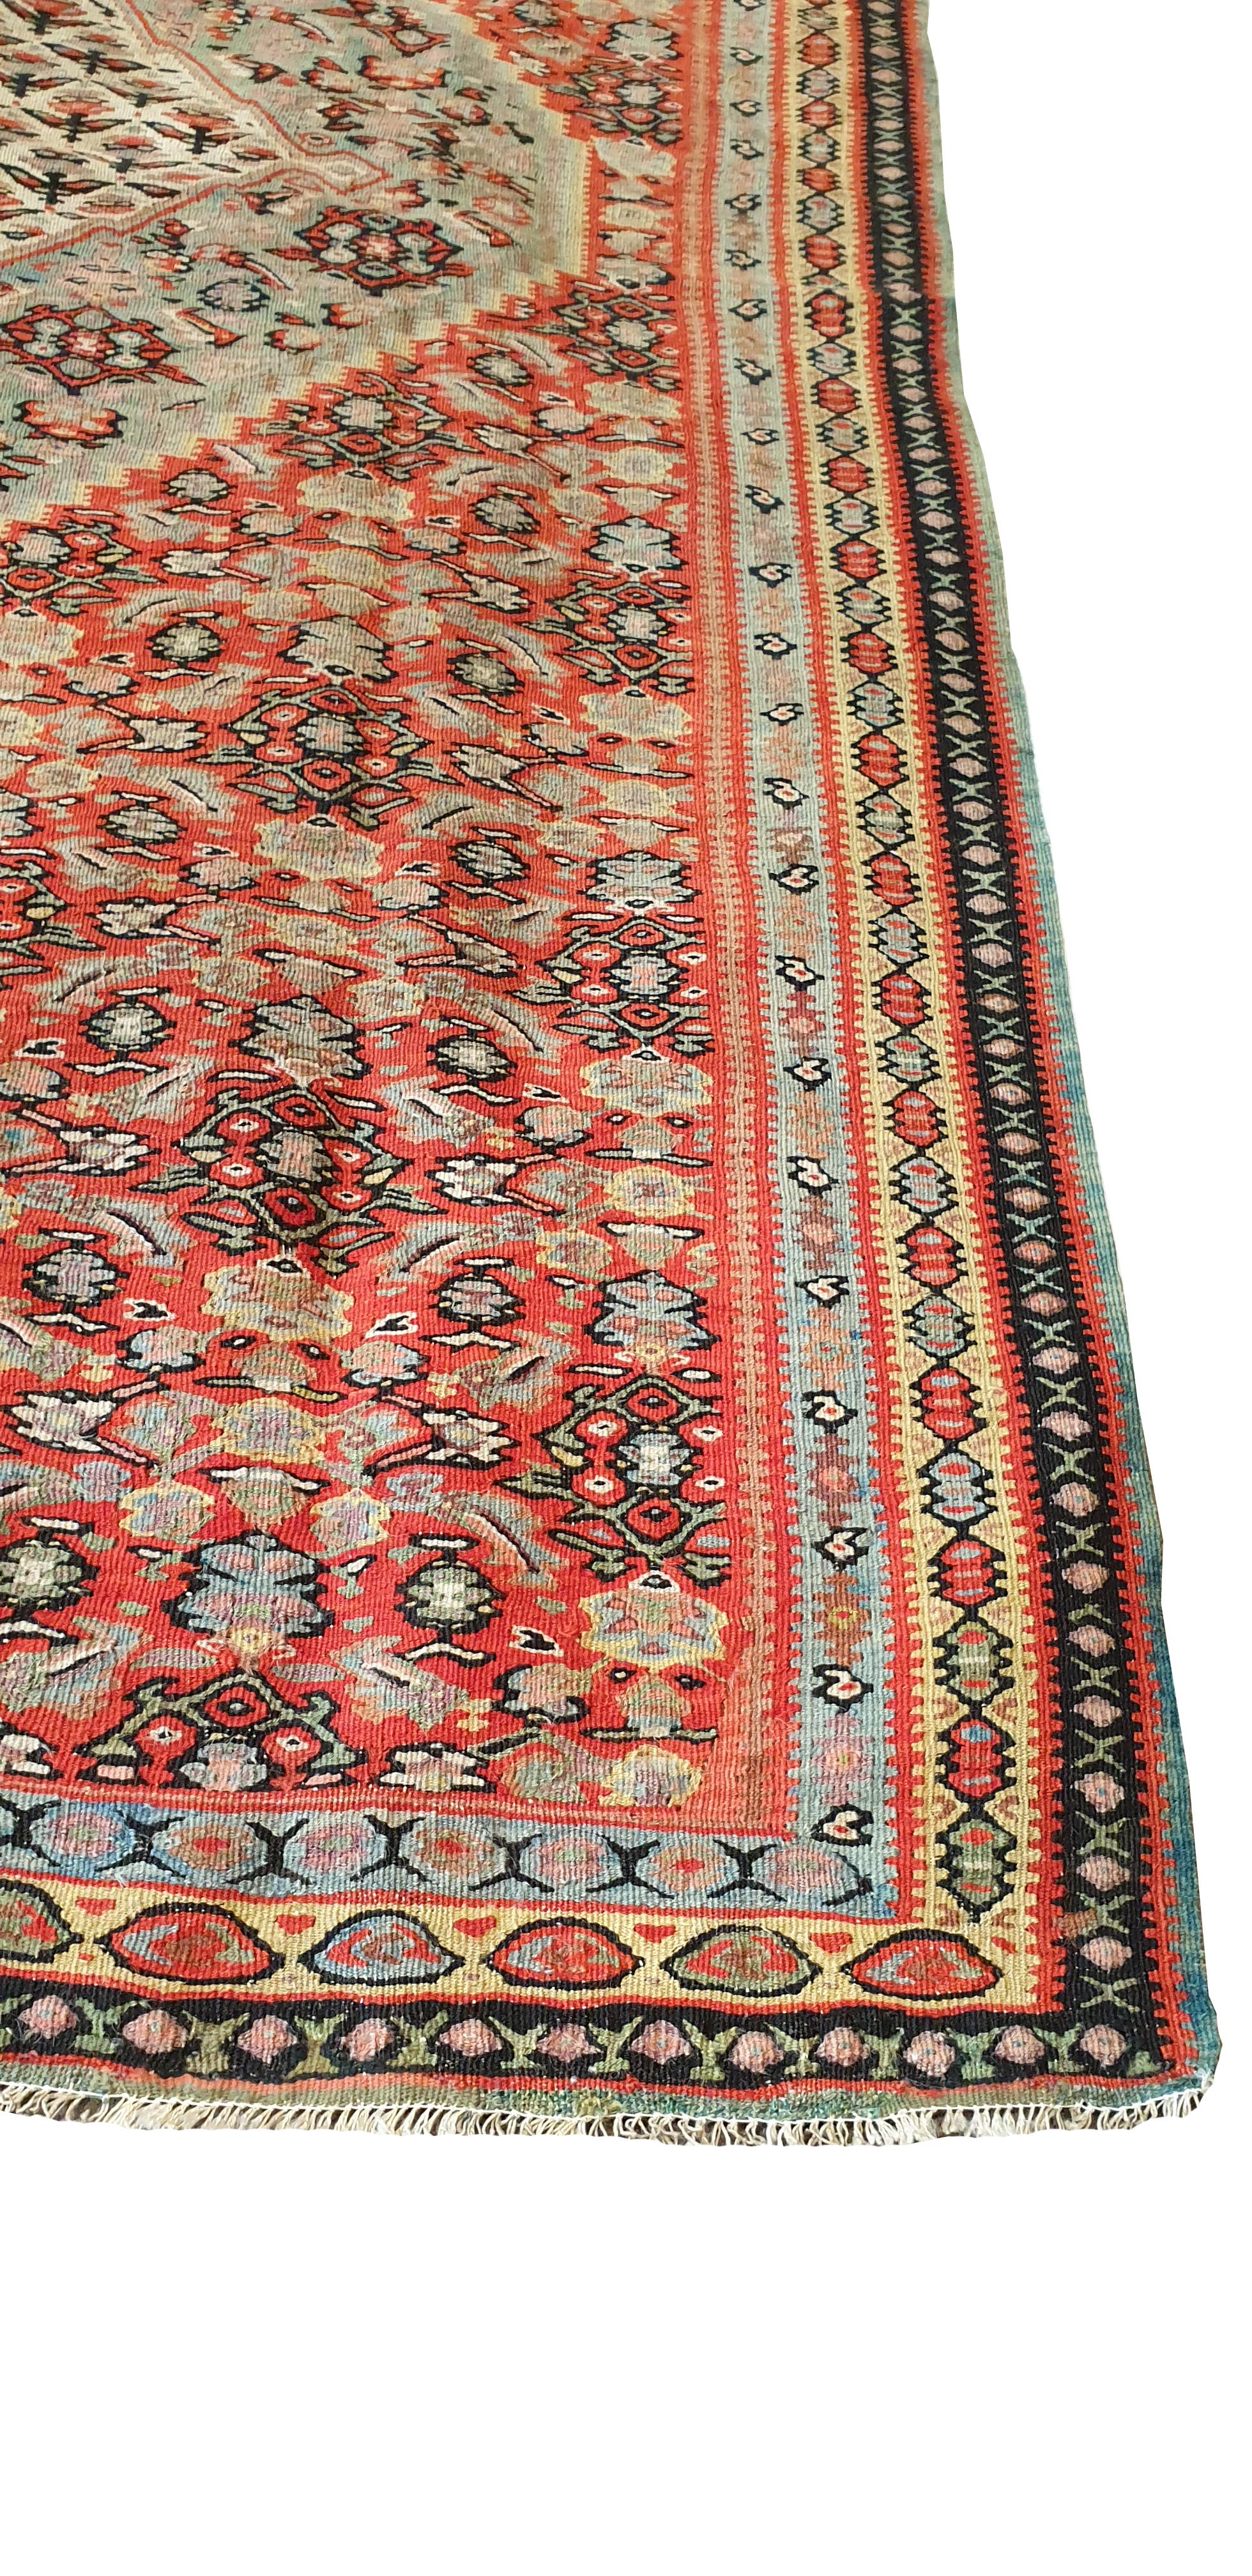 Hand-Woven 661 - 19th Century Senneh Kilim with Beautiful Patterns For Sale